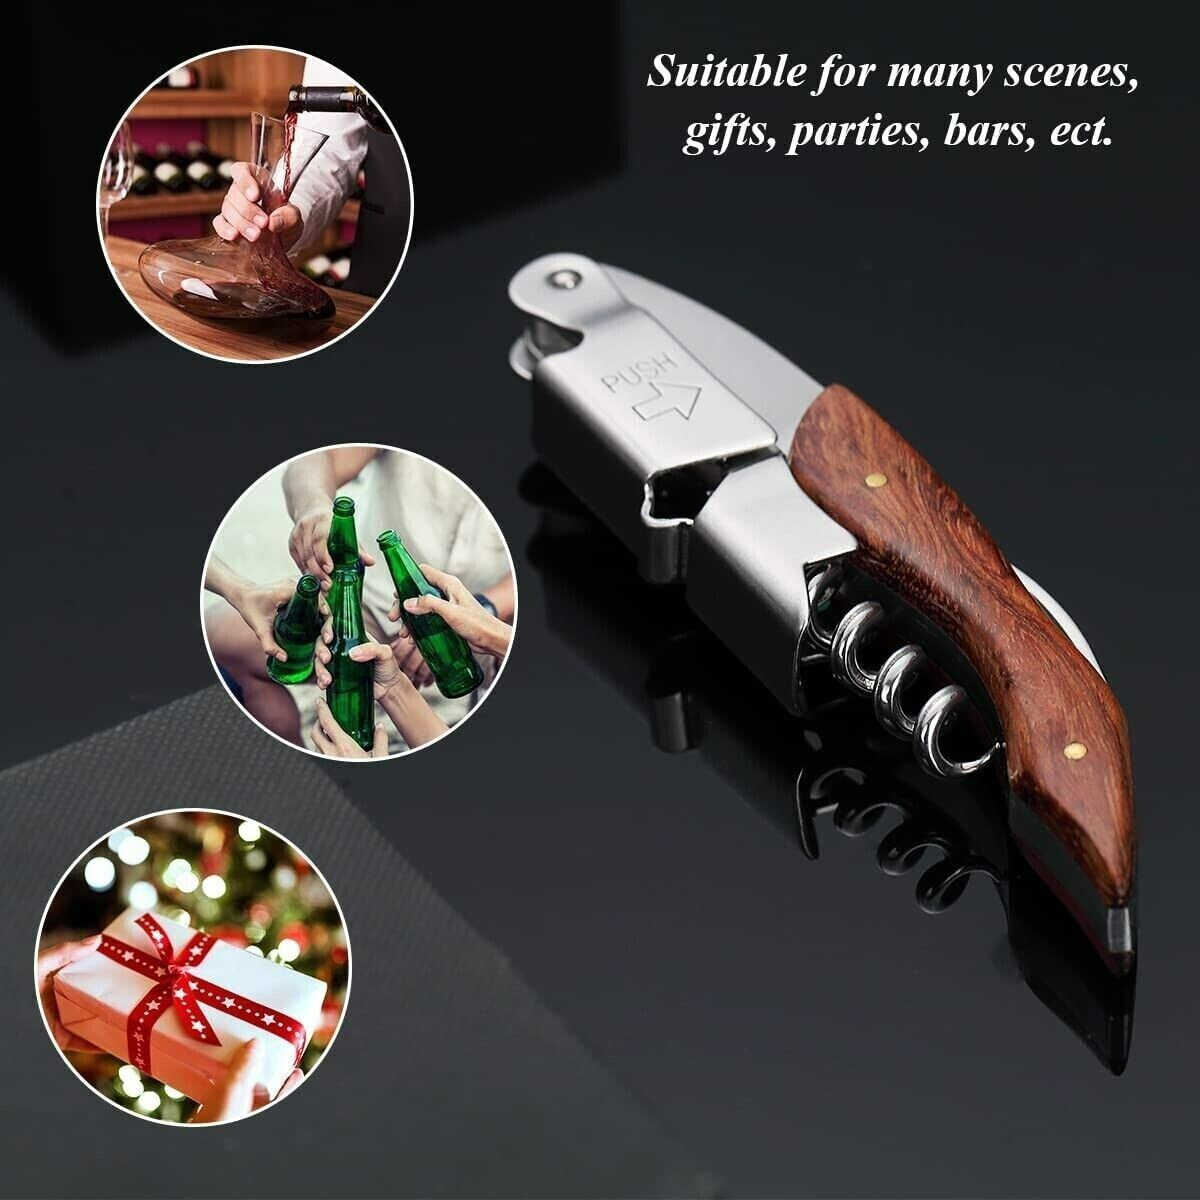 Corkscrew Professional Waiters Mate by Pear - This Wine Opener 3-in-one Wine Tool is Used to Open Beer and Wine Bottles by Waiters, Sommelier and Bartenders